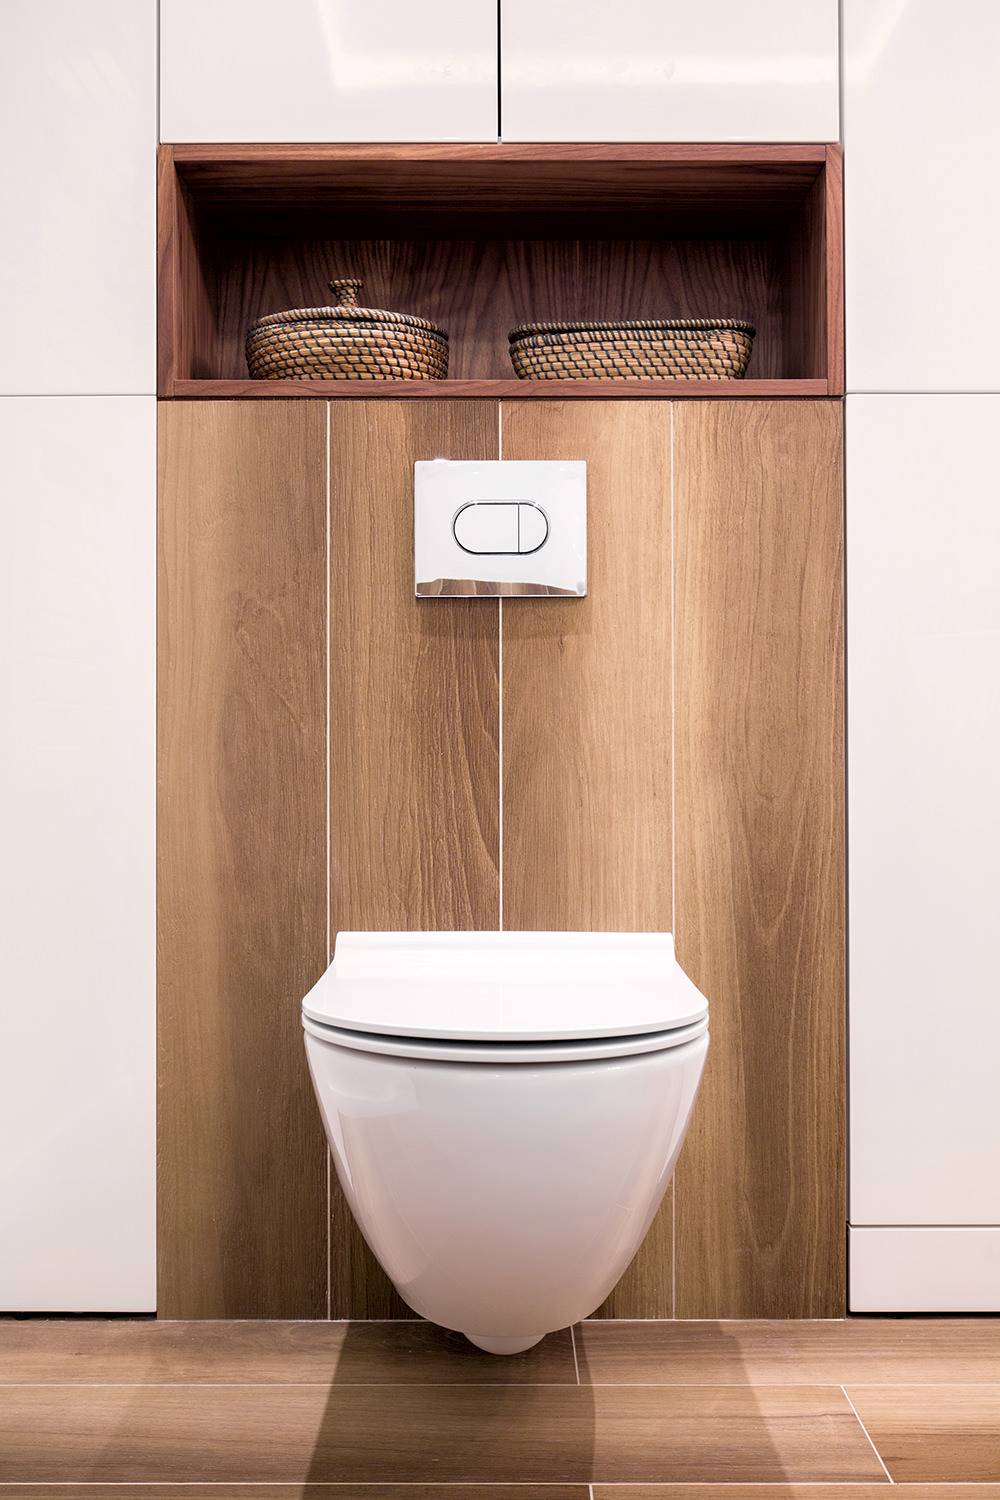 Stylish, modern ambience in the bathroom with a modern toilet seat.